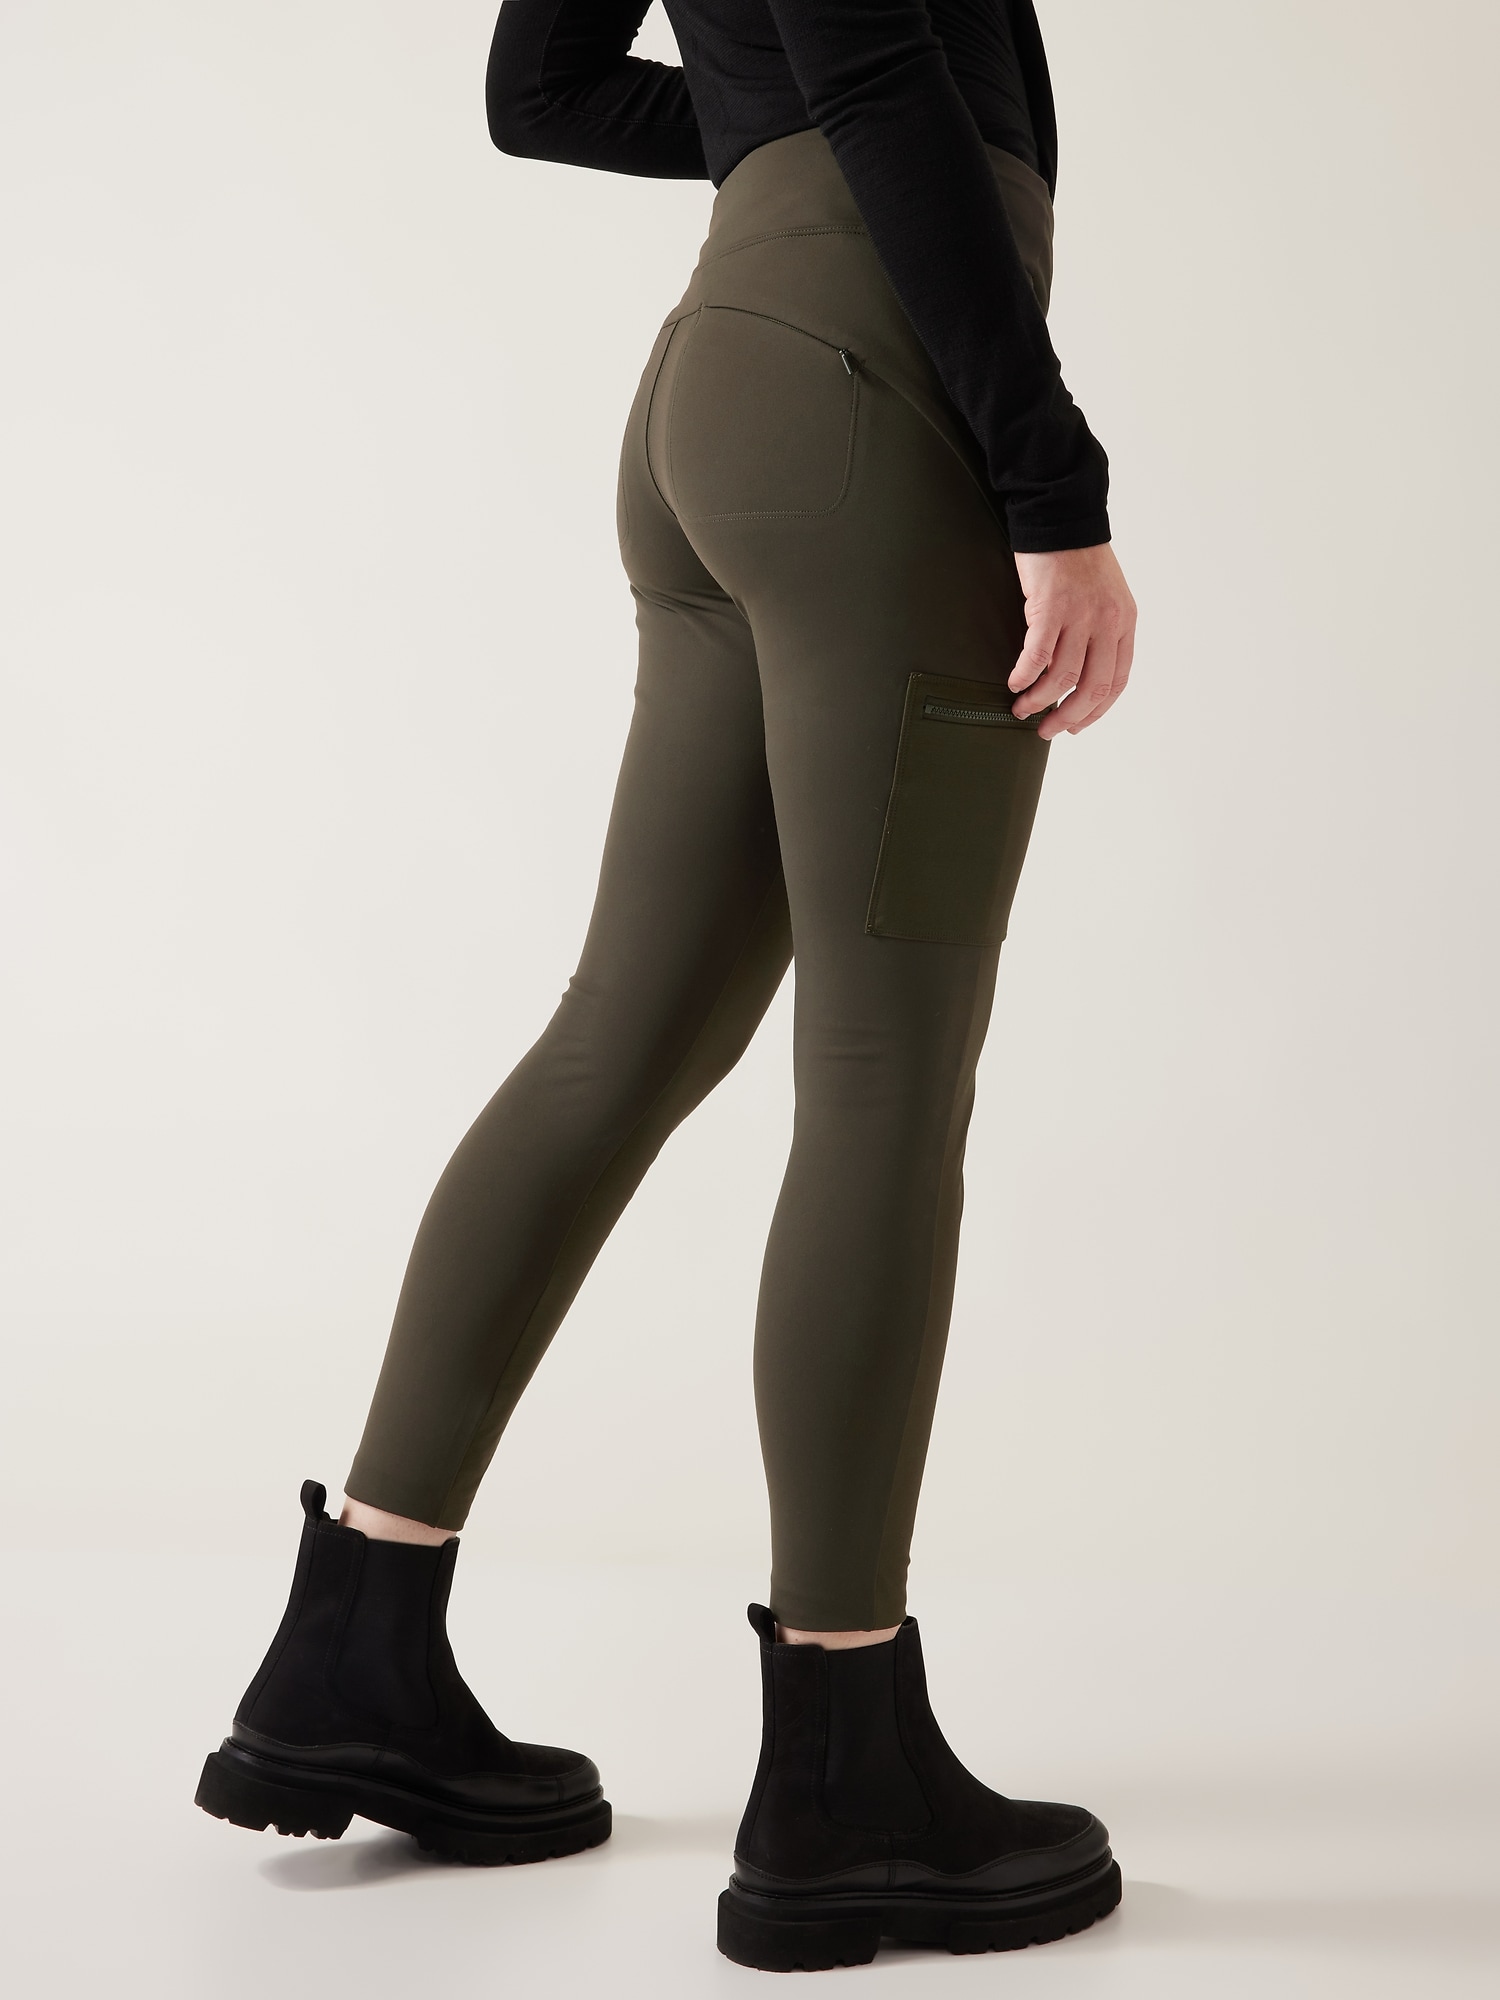 ZYIA Brilliant Leggings Product Review 